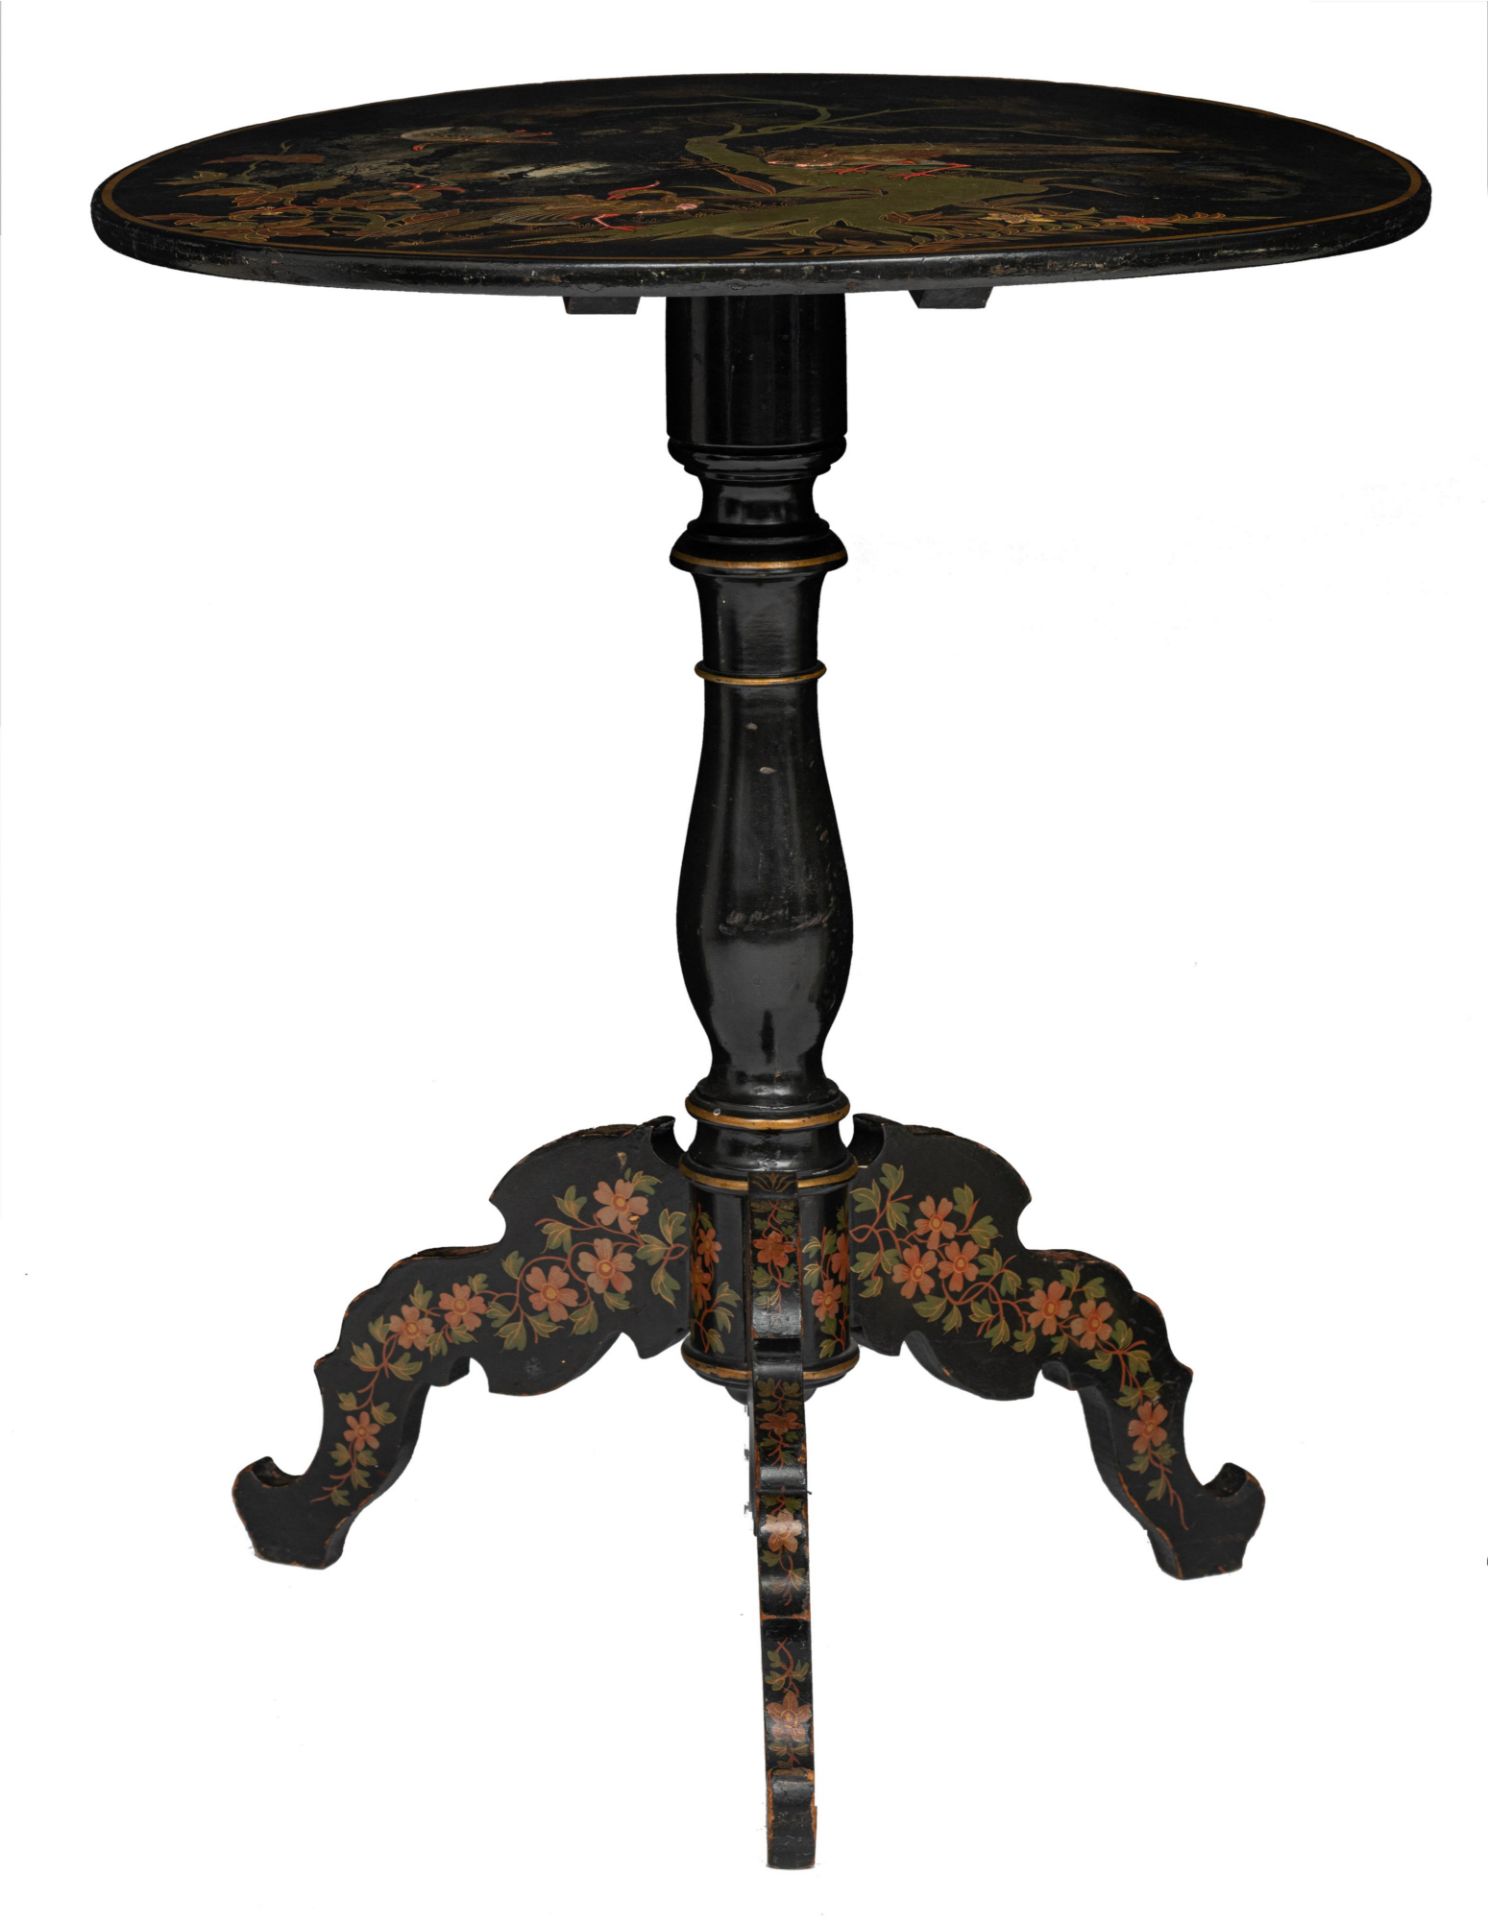 A Napoleon III lacquered fold-over tea table with a chinoiserie decoration, H 72 - ø 59 cm